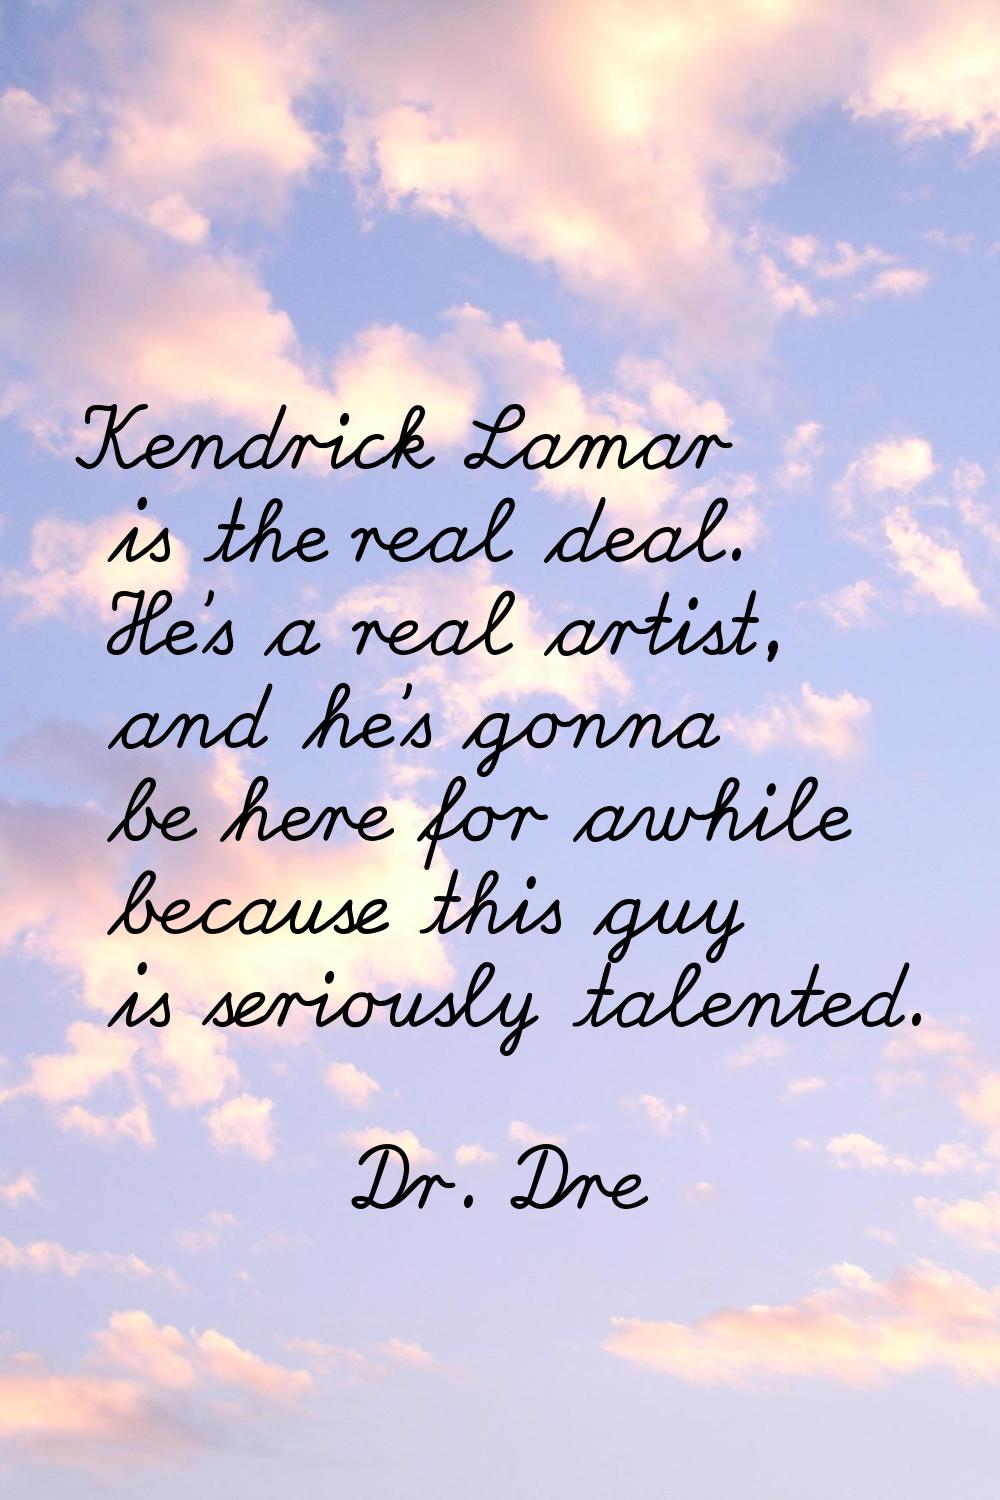 Kendrick Lamar is the real deal. He's a real artist, and he's gonna be here for awhile because this